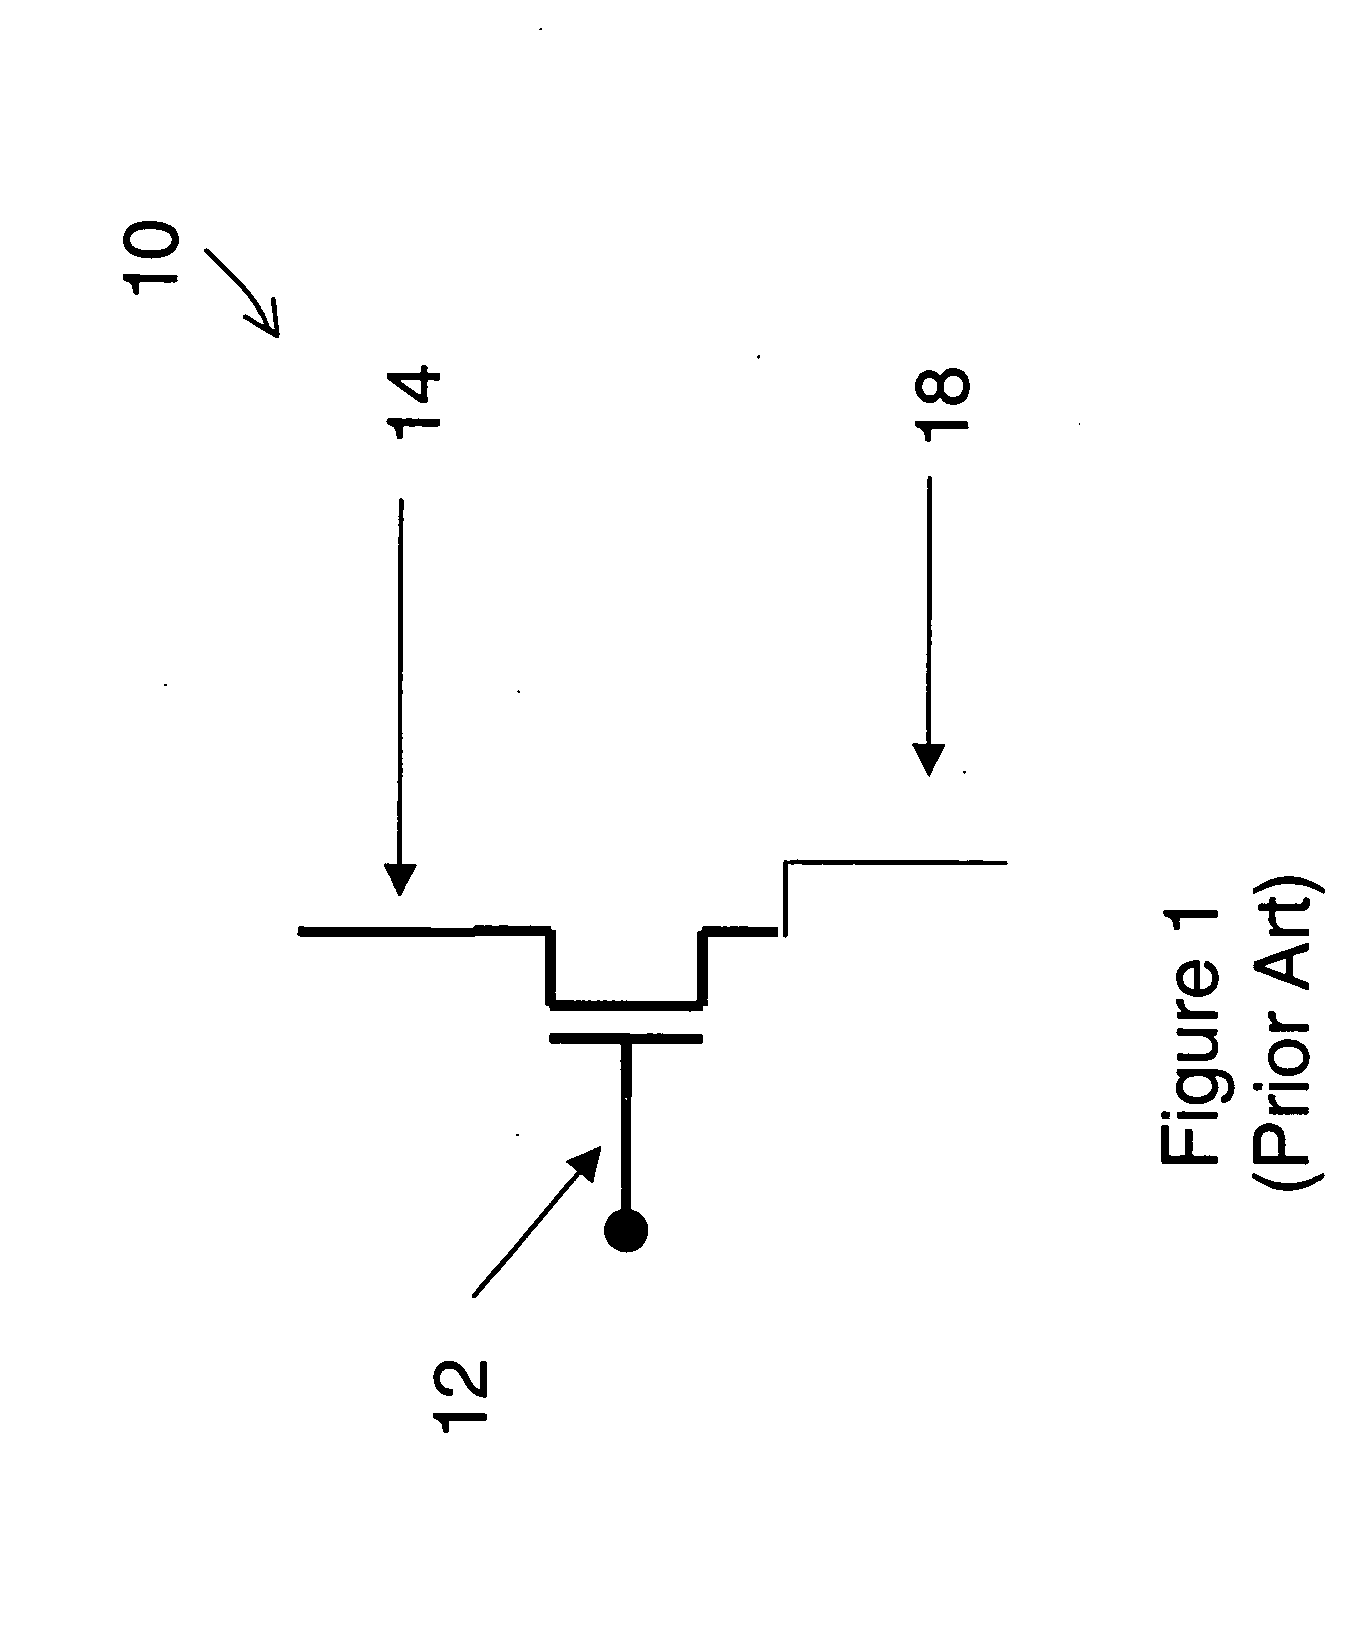 Non-volatile electromechanical field effect devices and circuits using same and methods of forming same